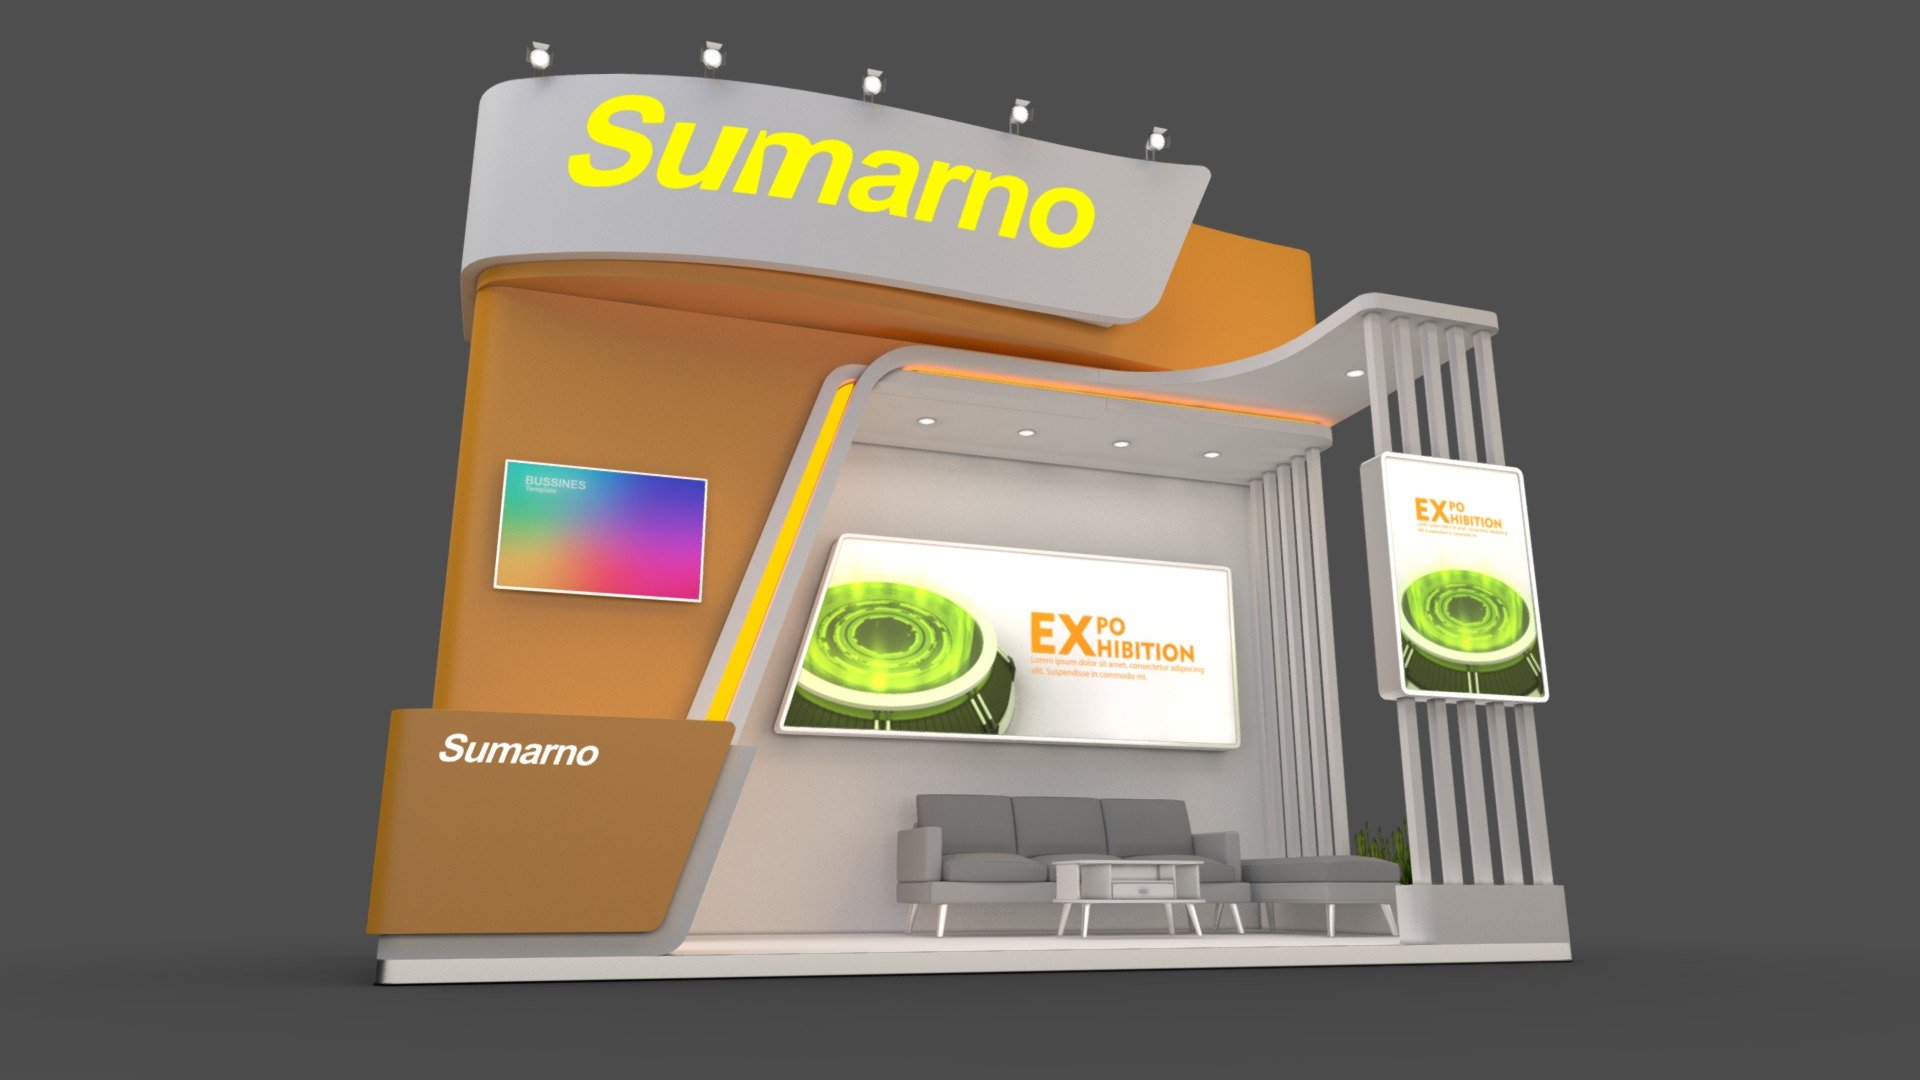 Exhibition stand 3D model
Virtual booth 3D model

6x3m / 18 Sqm / Height 5.2 / 3 Exposed sieds / Unit:cm

Format:
1. Autodesk 3Ds max 2018 / V ray 3.60.03
2. Autodesk 3Ds max 2015 / Default Scanline
3. Fbx Format (Normal / Baked map)
4. Obj Format (Normal / Baked map) - EXHIBITION STAND OQ18 - Buy Royalty Free 3D model by fasih.lisan 3d model